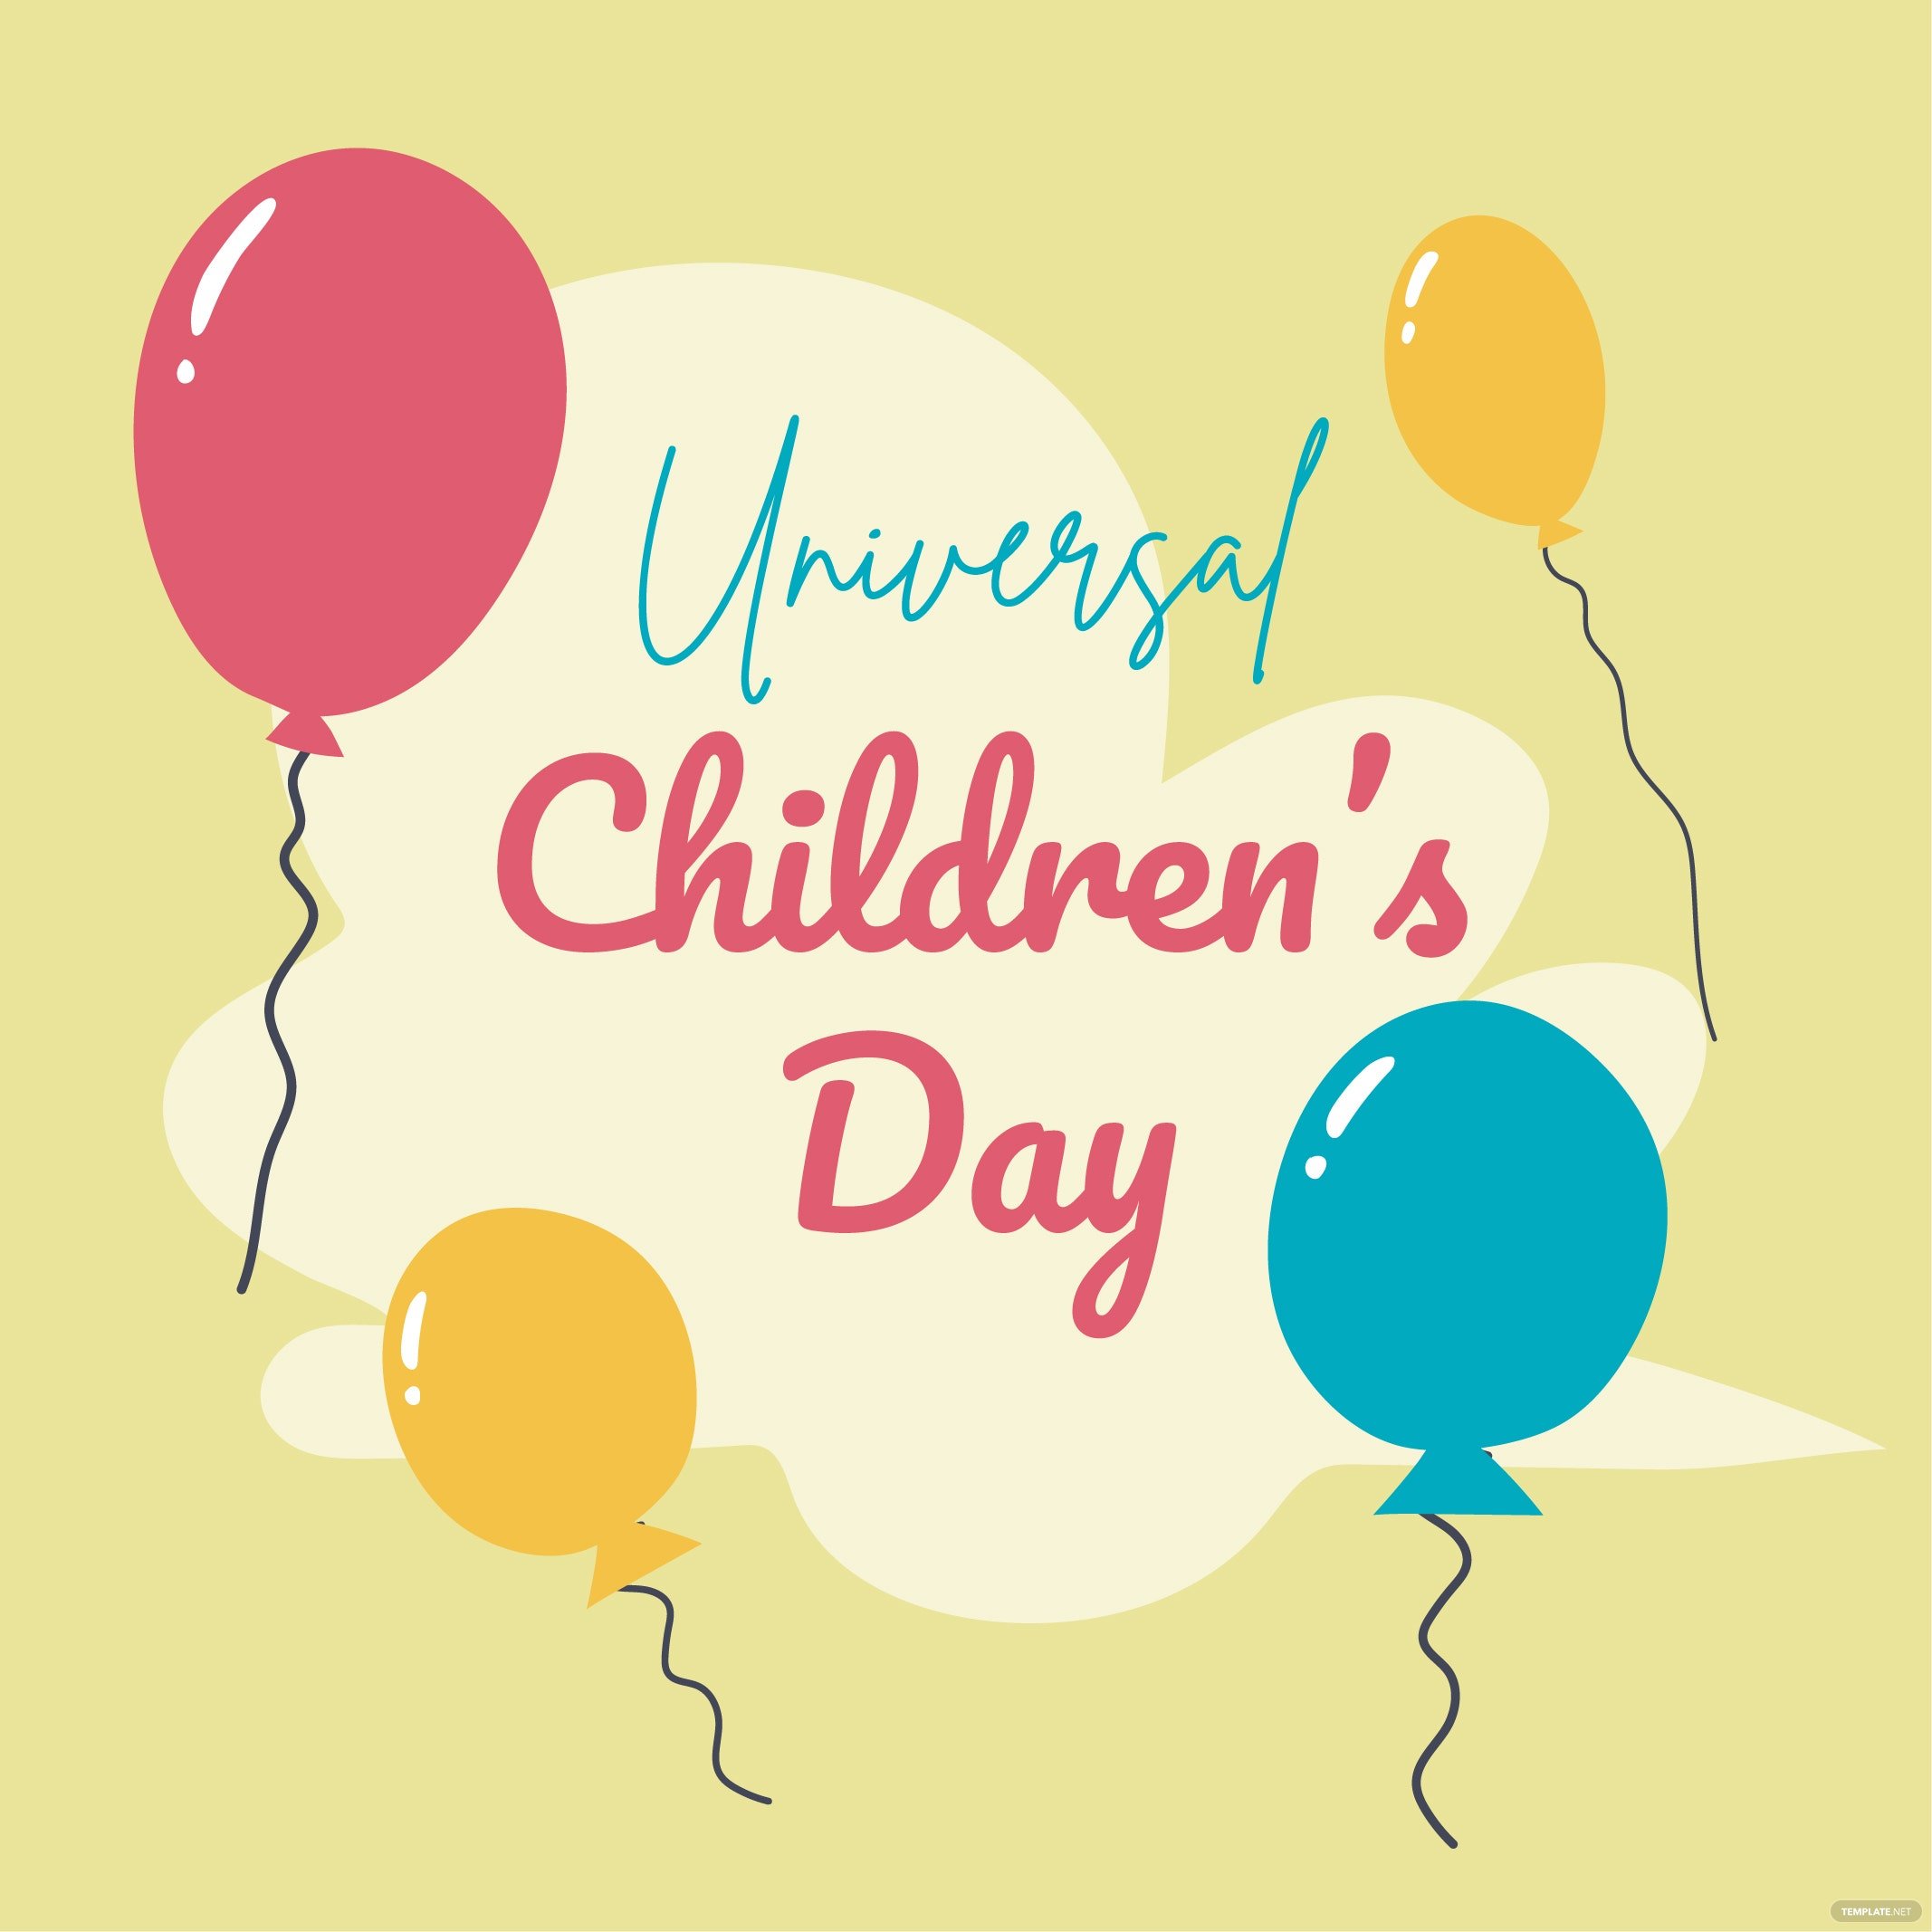 The Universal Children's Day – ISSD